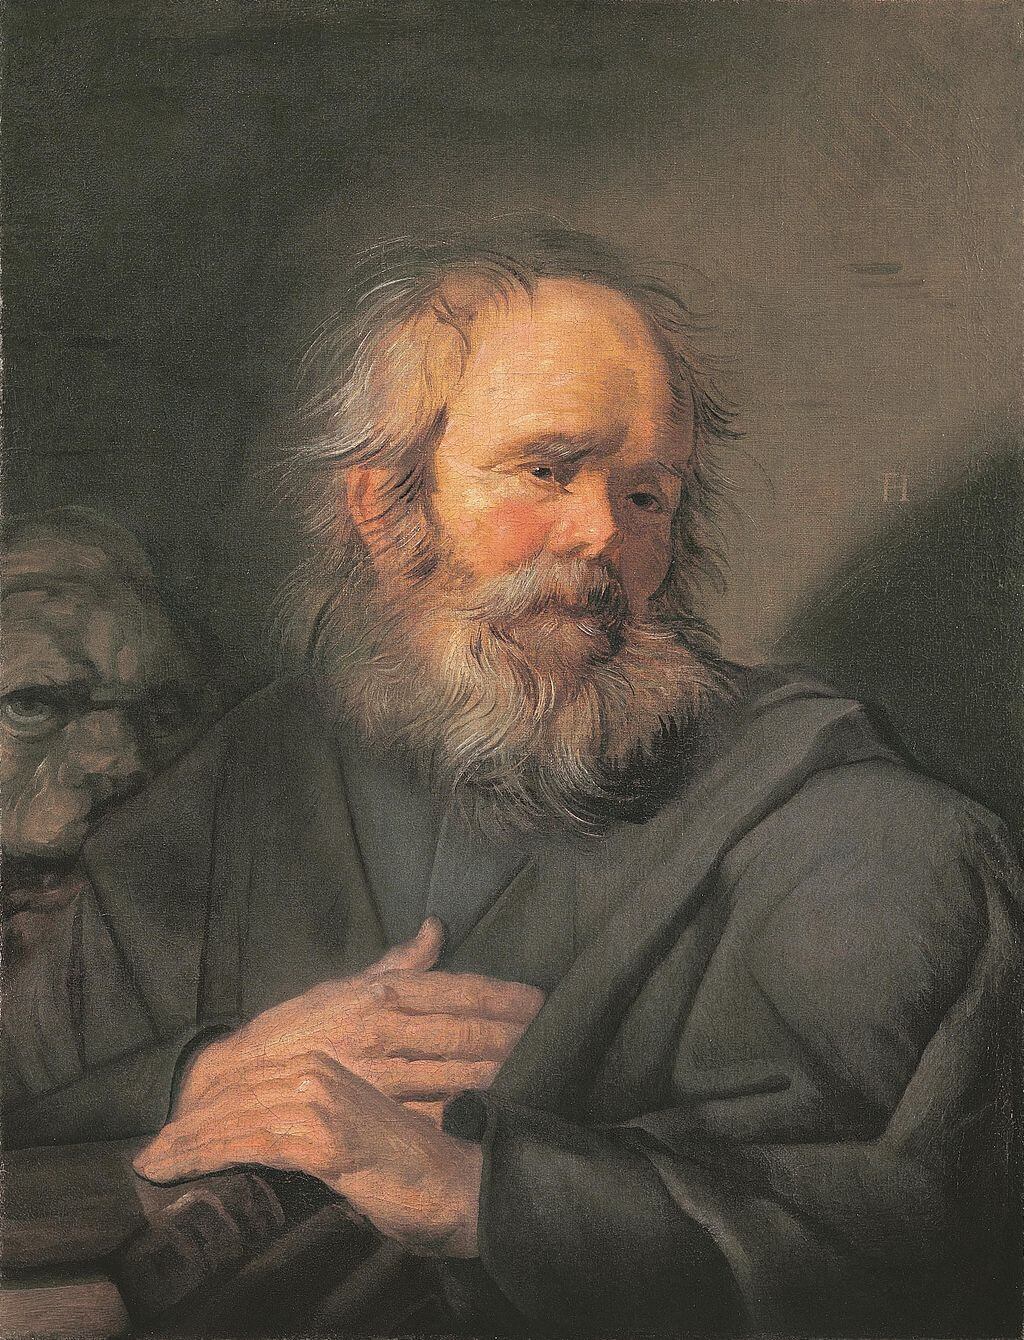 Saint Mark by Frans Hals in the Pushkin Museum after first restoration but before additional cleaning